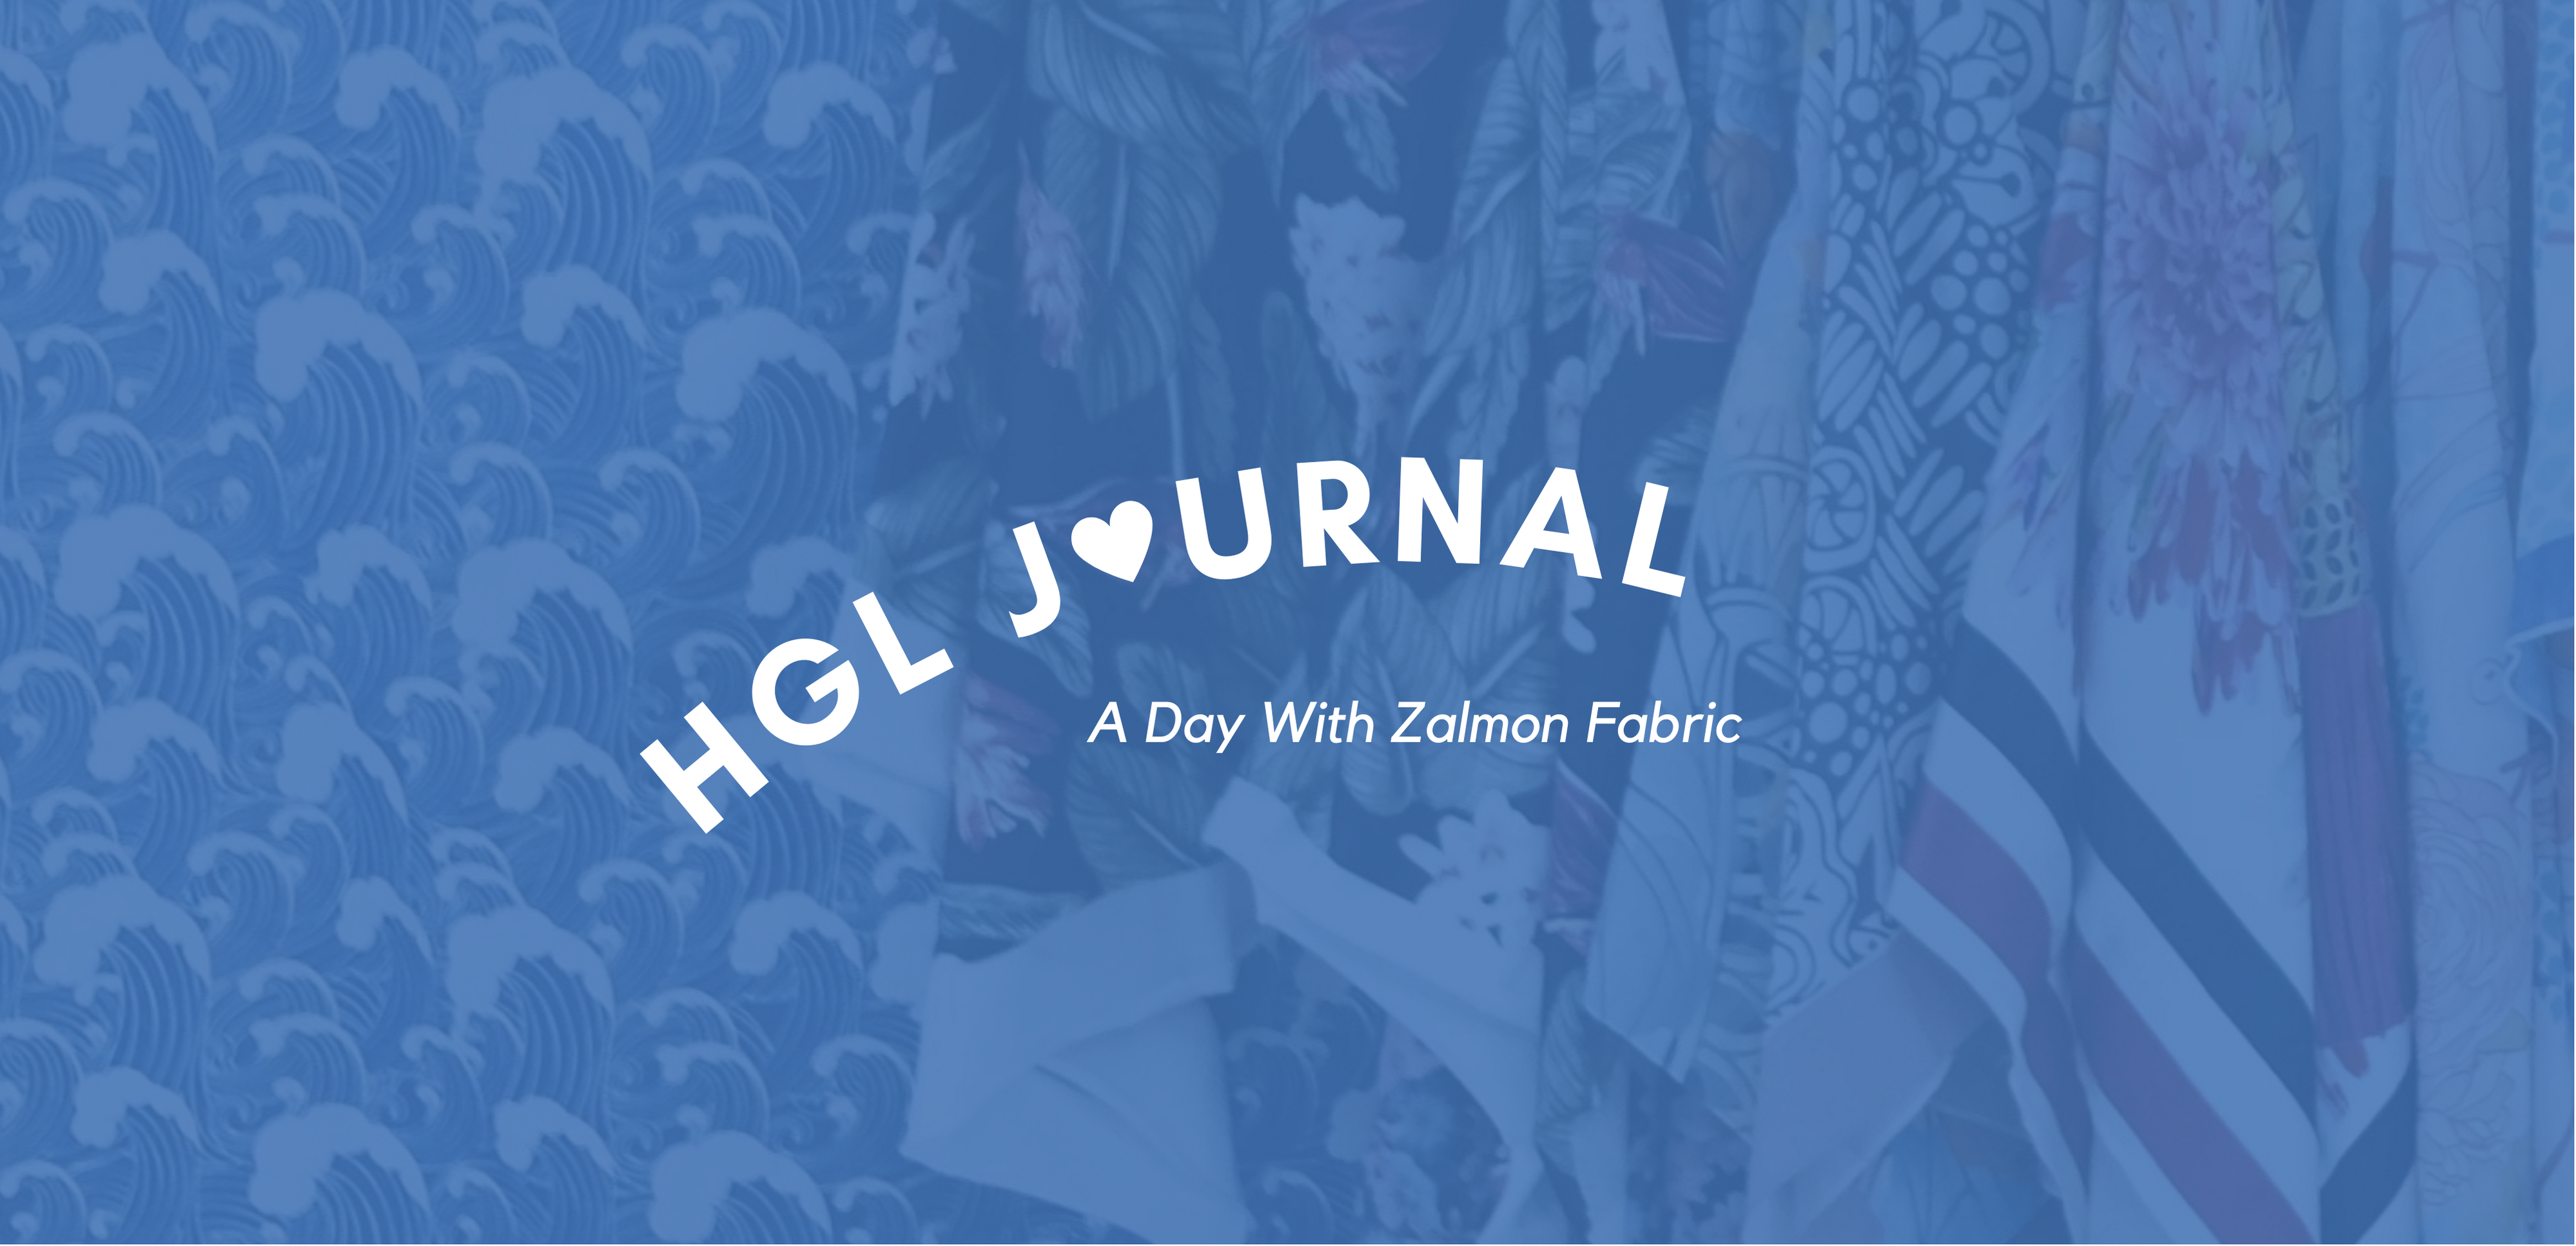 HGL A DAY WITH ZALMON FABRIC